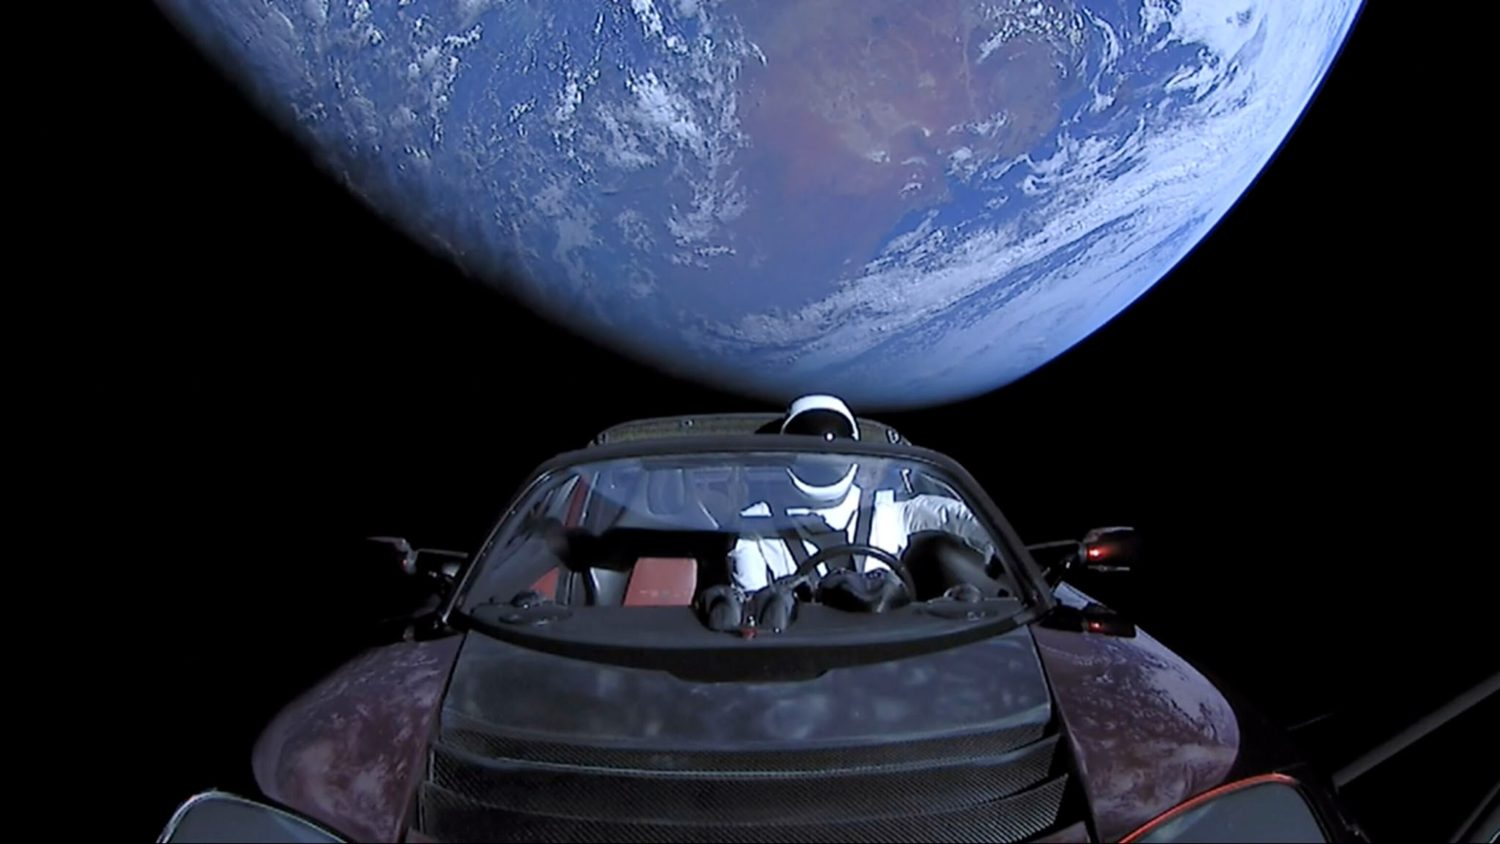 Here's Where Elon Musk's Tesla He Shot Into Space Is Now After 5 Years